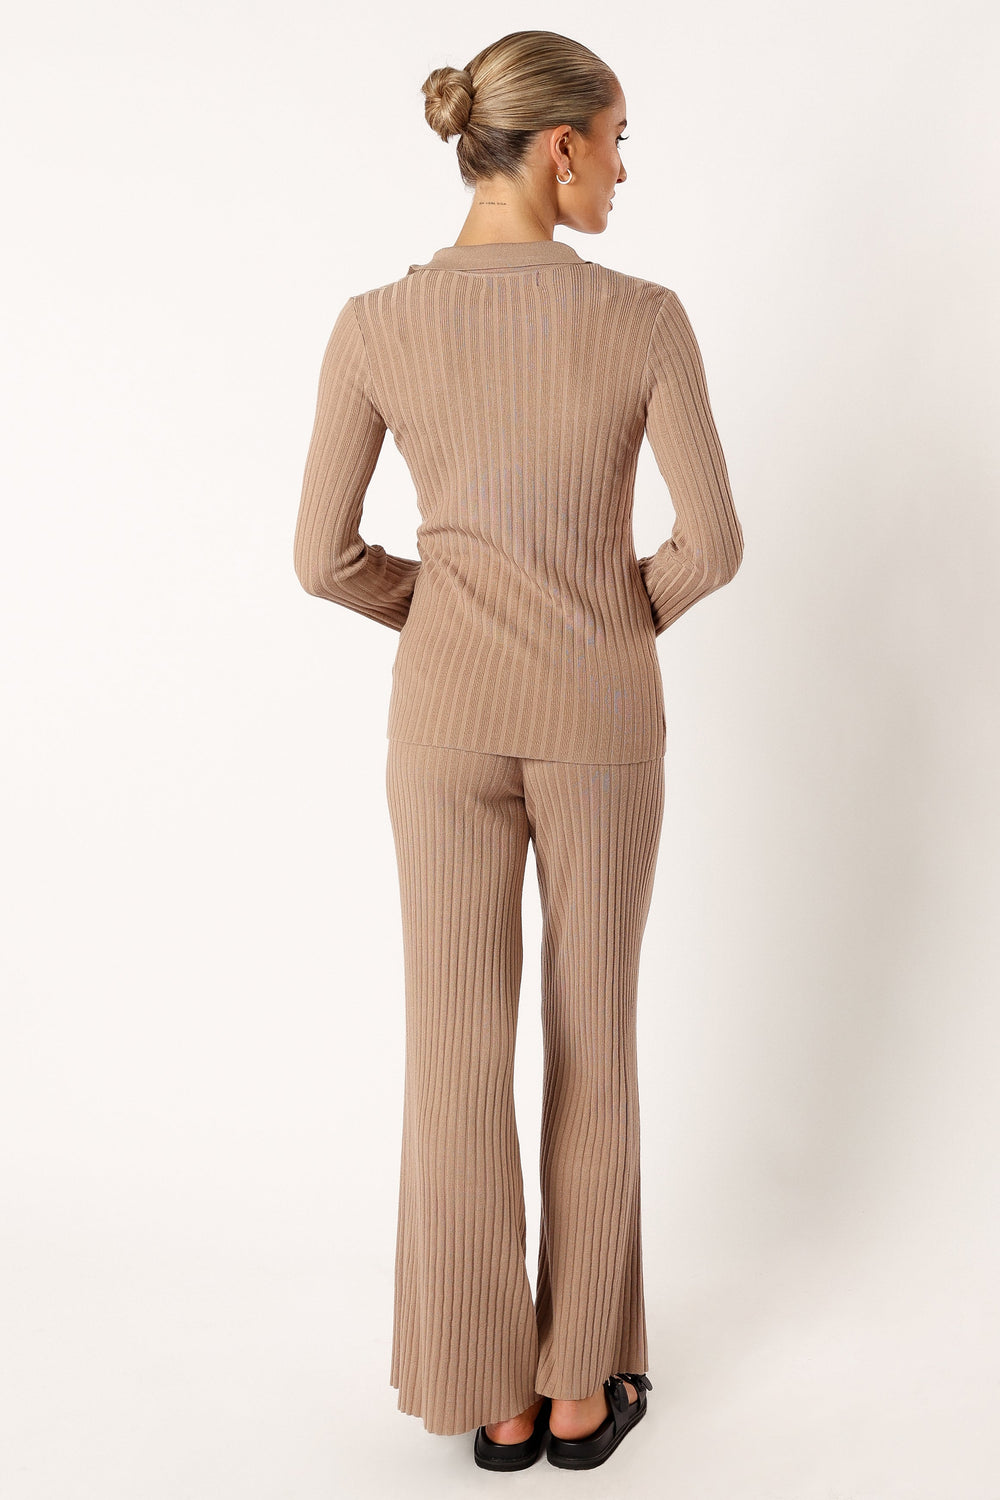 MATCHING RIB KNIT SET TREND - NOT JUST FOR LOUNGING IN - VP of STYLE